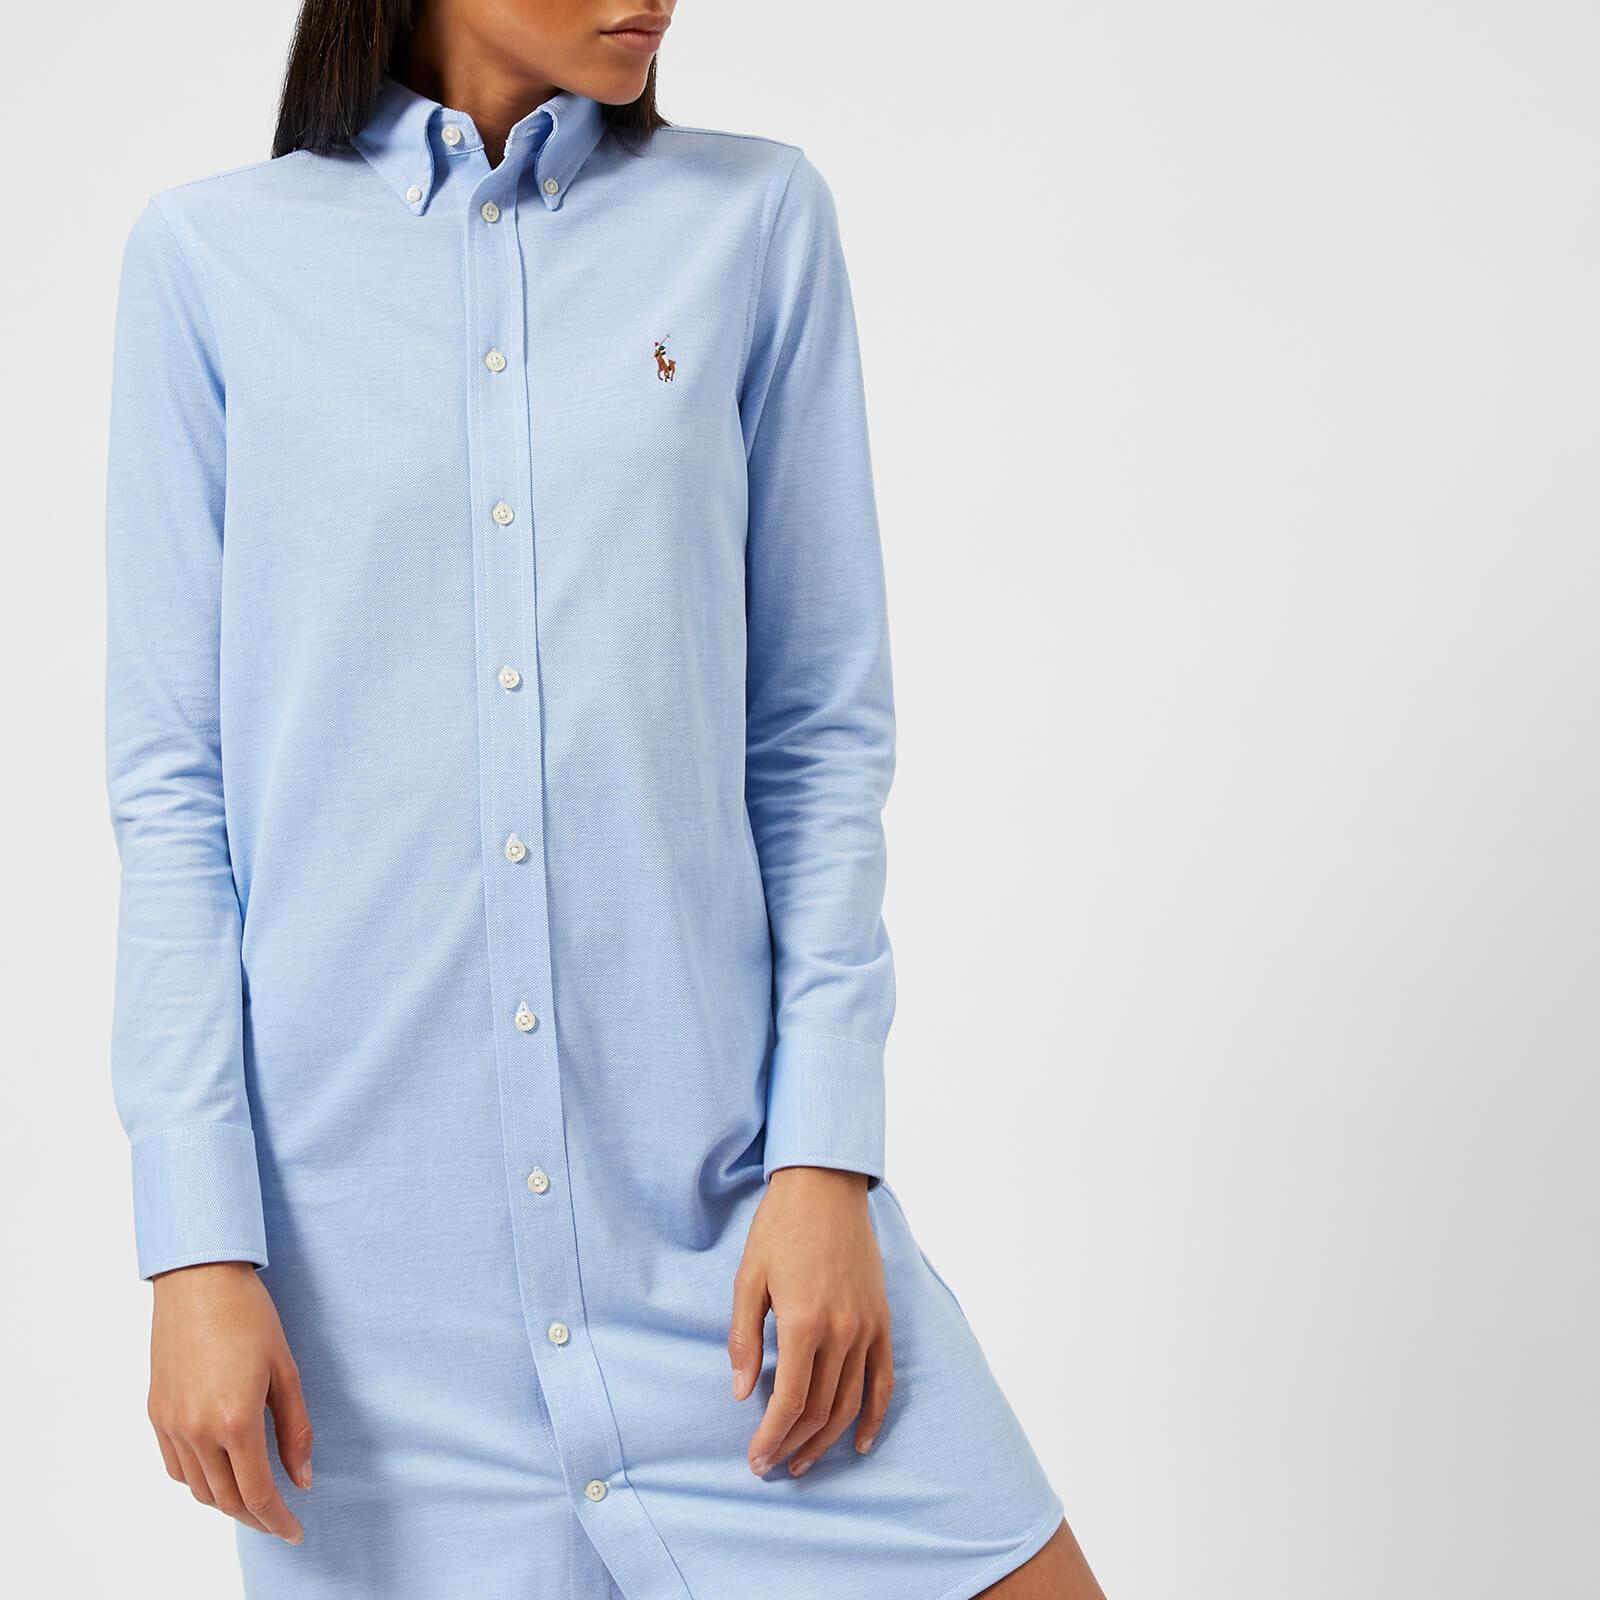 Triathlete Elusive Agree with Polo Ralph Lauren Oxford Shirt Dress in Blue | Lyst